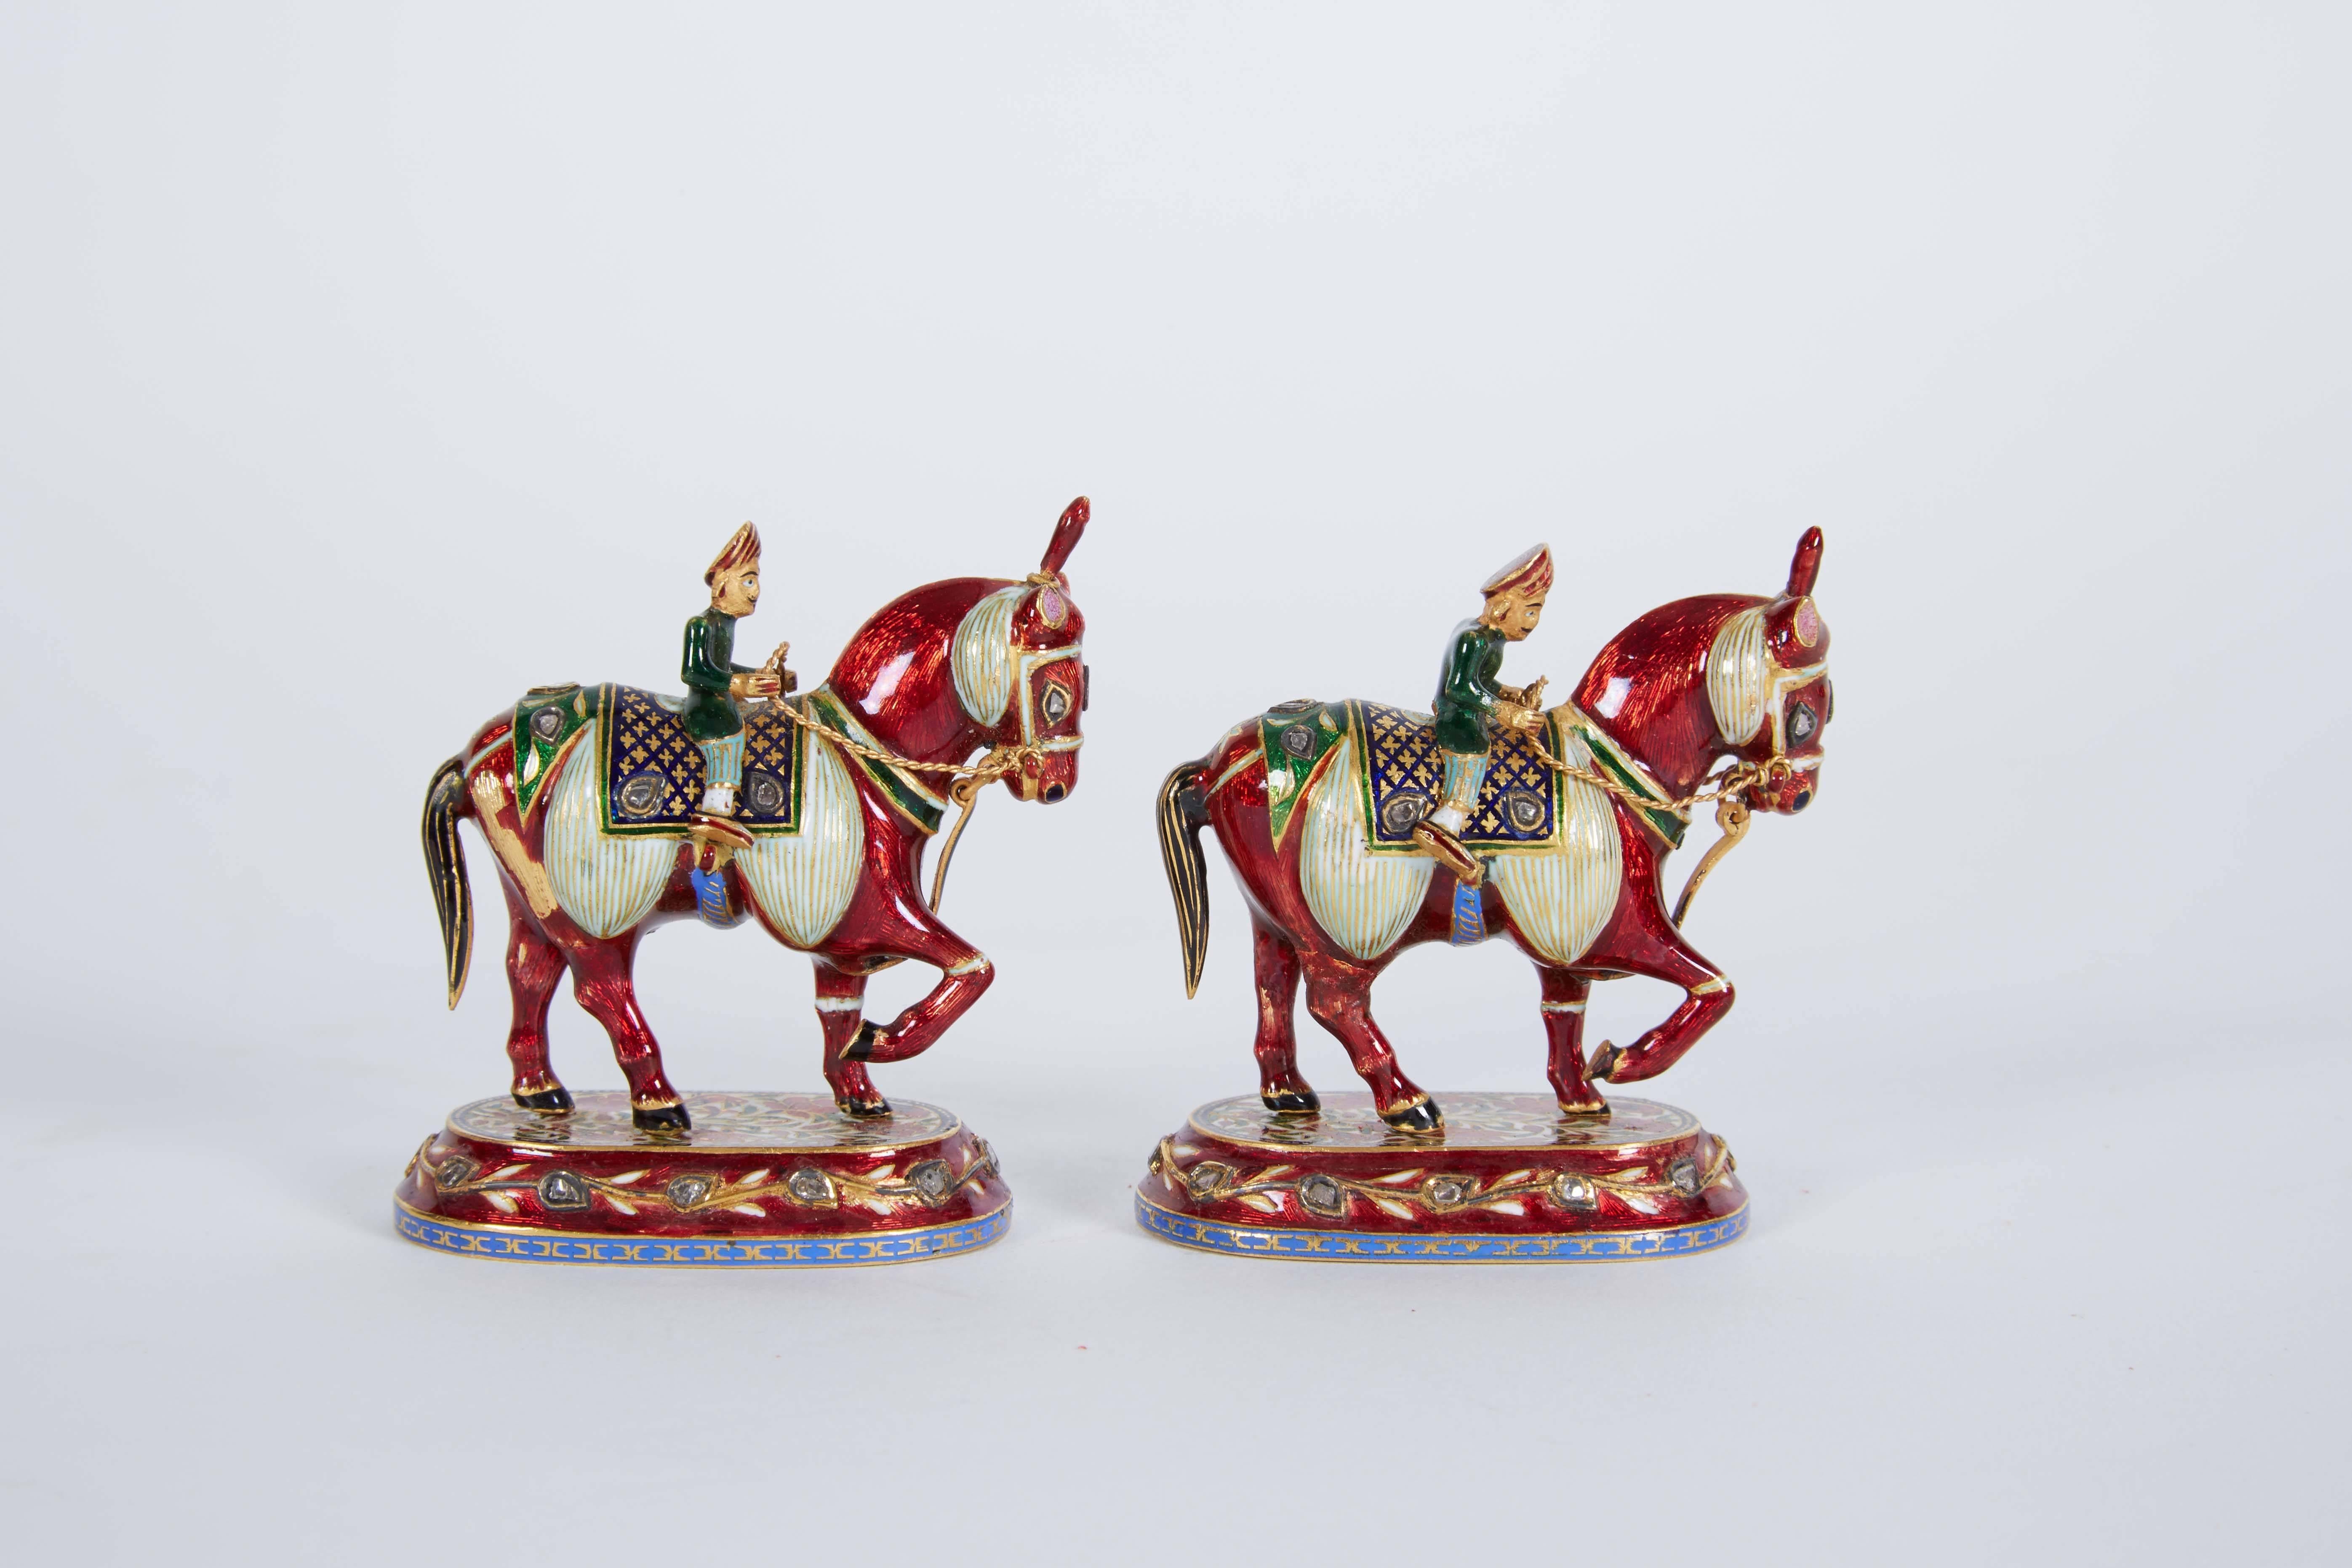 A pair of Jaipur Indian 22-karat gold enamel and Diamonds horse-riders (Chess figures)

Solid 22-karat gold figures. Very high quality objects.

circa 20th century.

Measures: Approximate weight: 200 grams total.
Each individual weight: 99.5